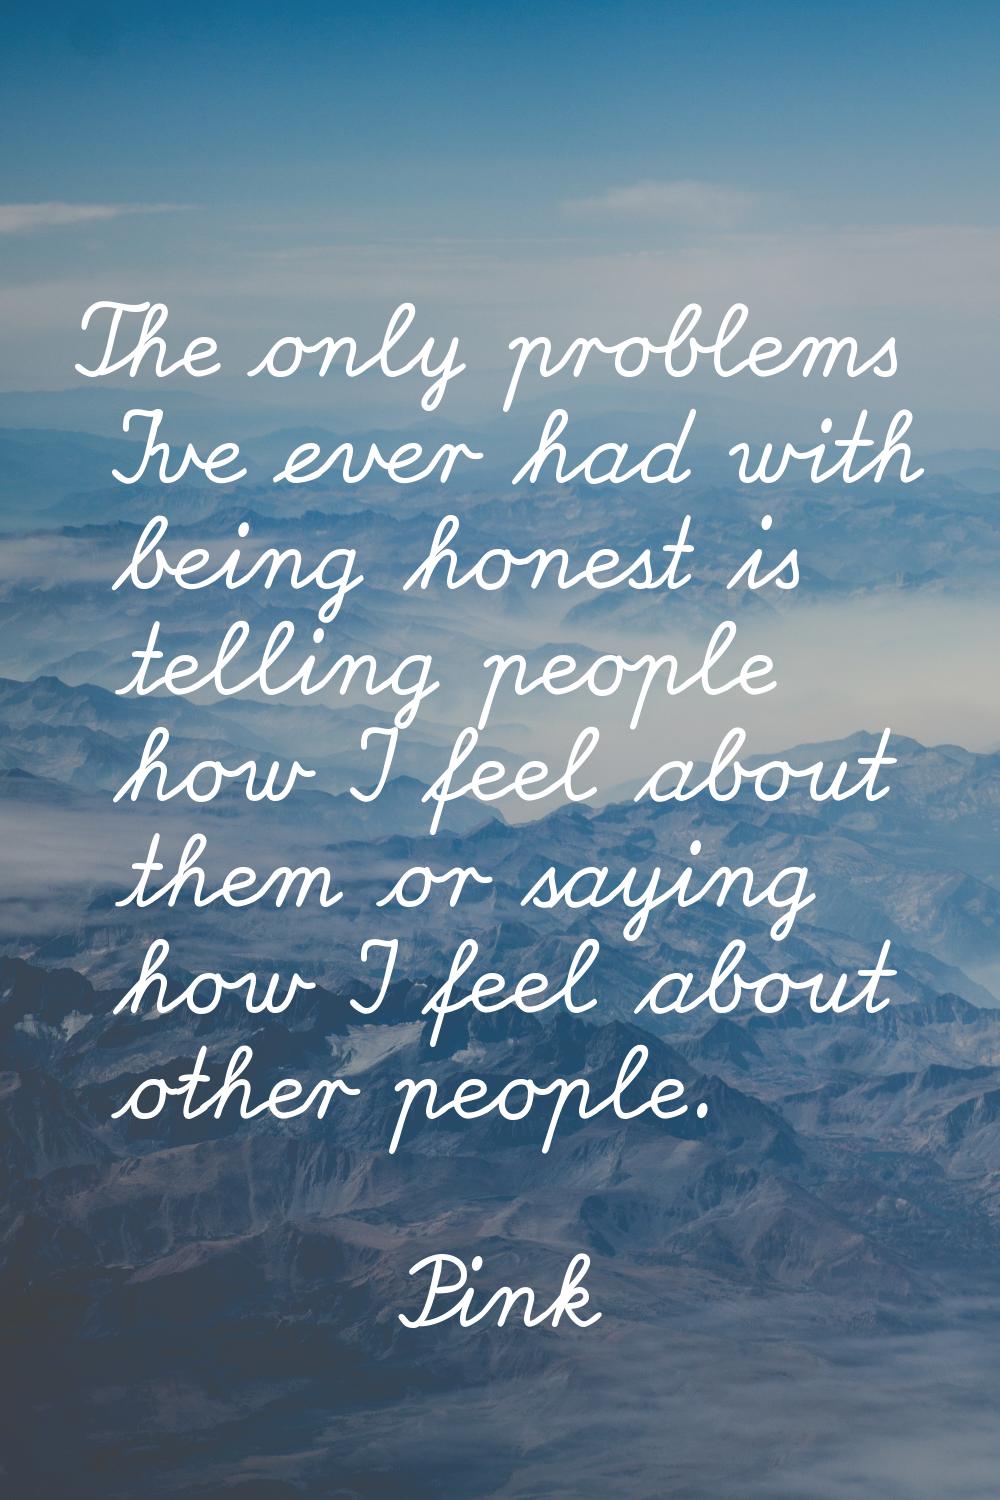 The only problems I've ever had with being honest is telling people how I feel about them or saying